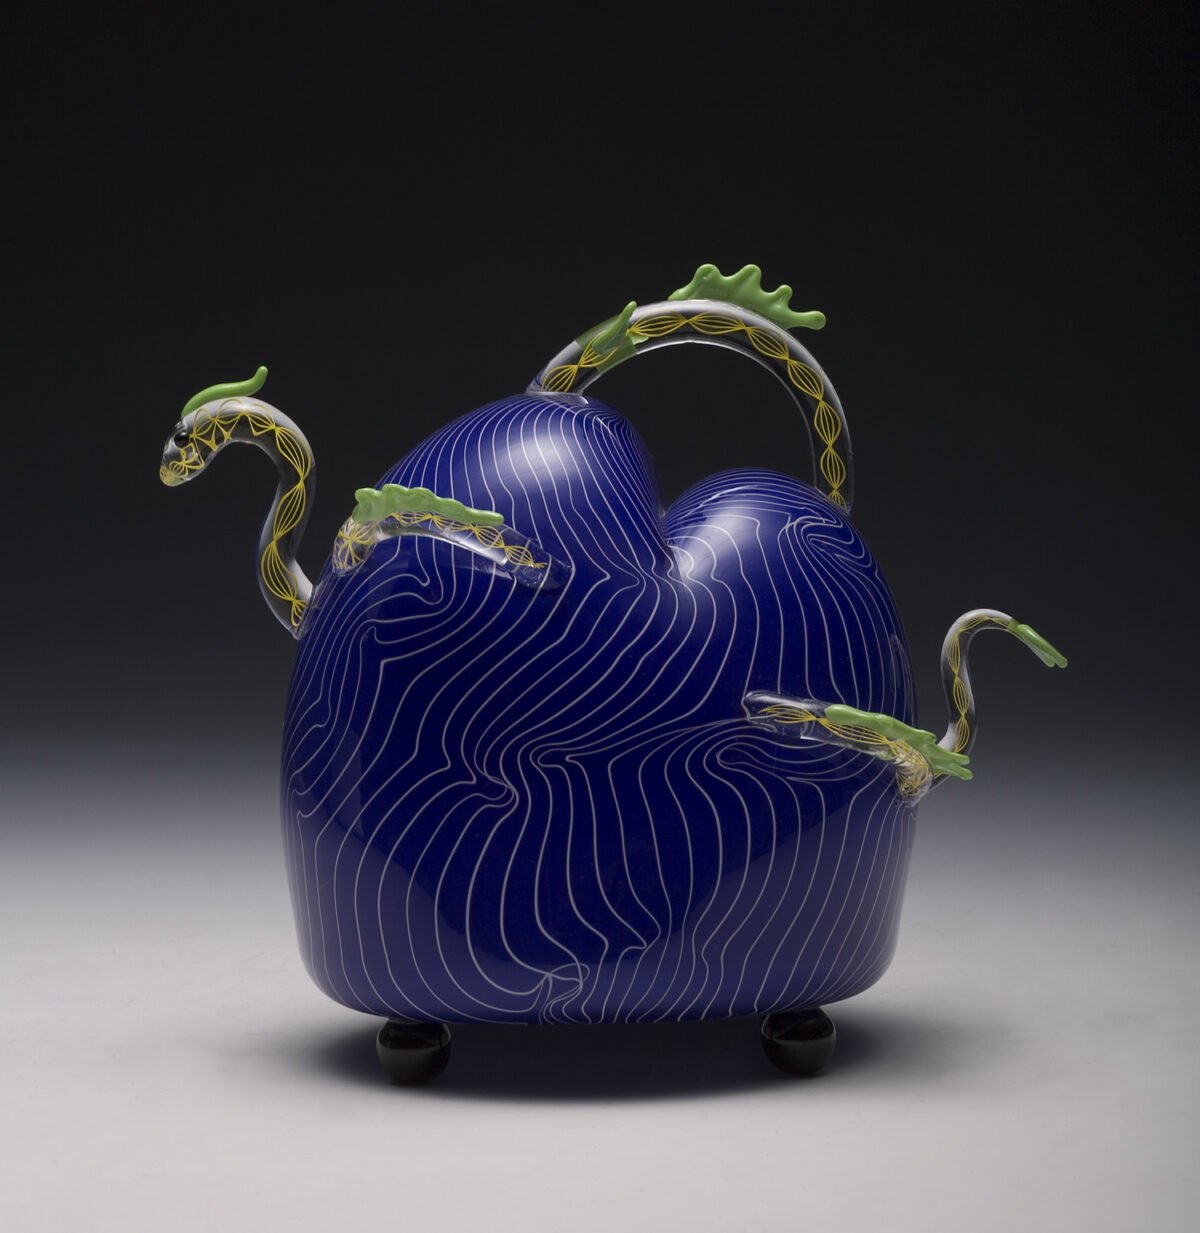 Nessie Teapot Gorgeous Animal Glass Sculptures With Vibrant Colors By Claire Kelly